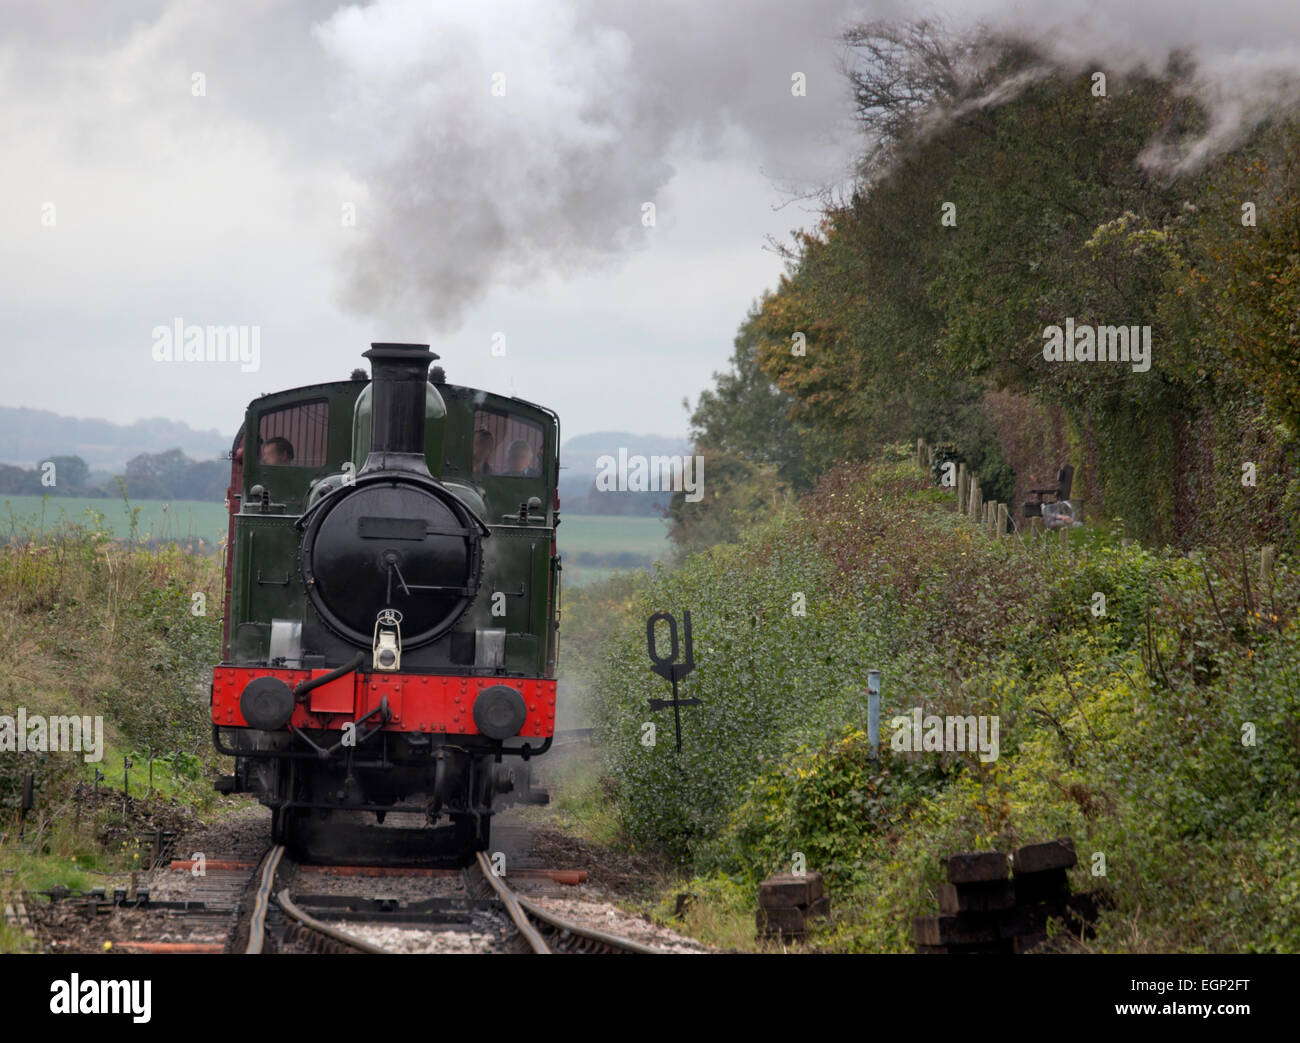 The steam locomotive 1450 approaching Ropley Station on the Mid Hants Railway (Watercress Line)  Hampshire, England, UK. Stock Photo